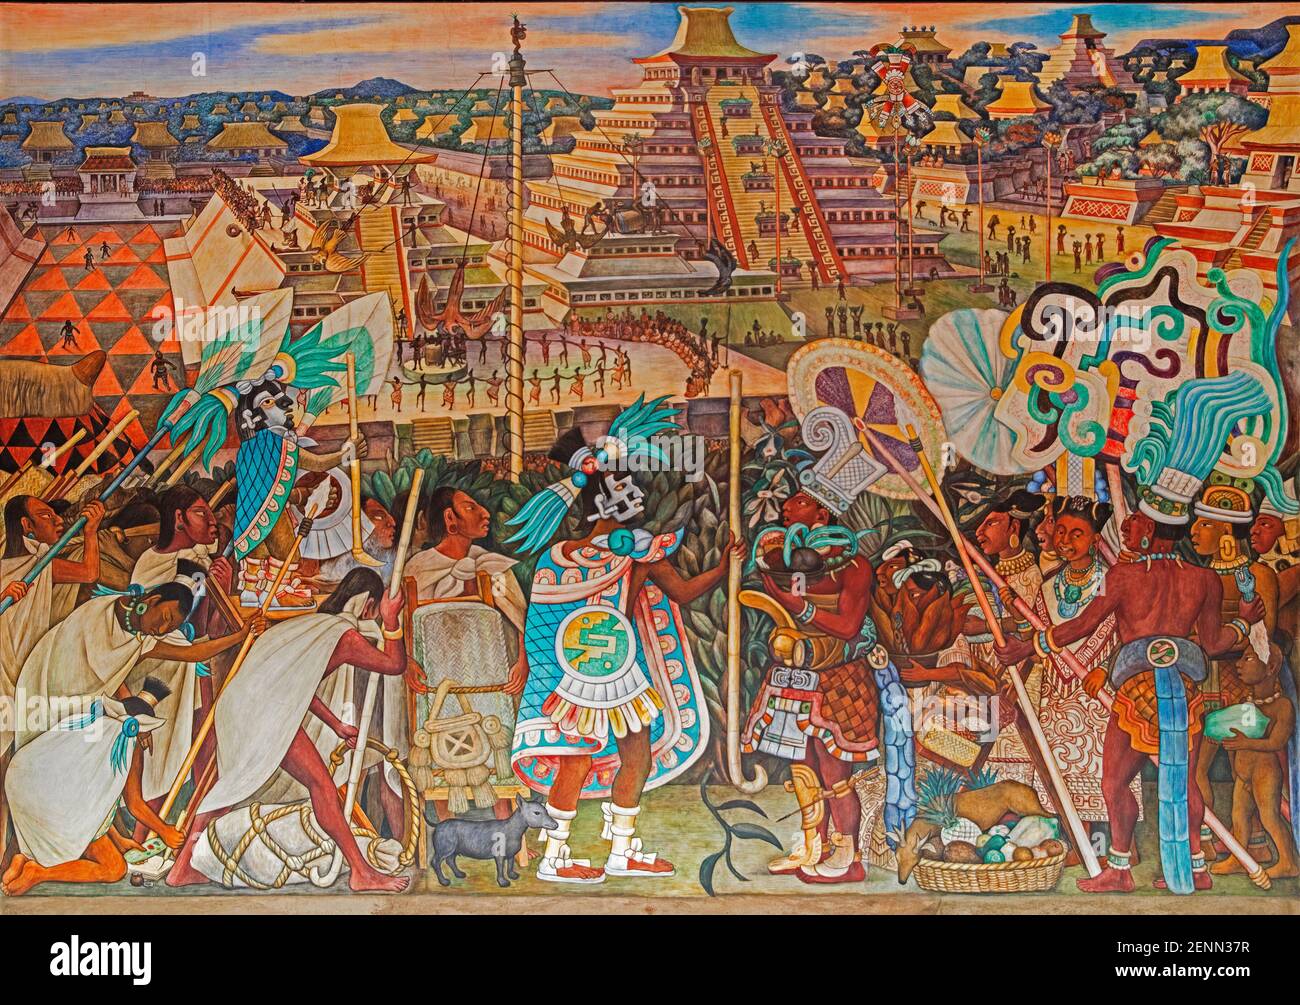 Diego Rivera mural showing Totonaca celebrations and ceremonies in the National Palace / Palacio Nacional, the president's residence in Mexico-City Stock Photo